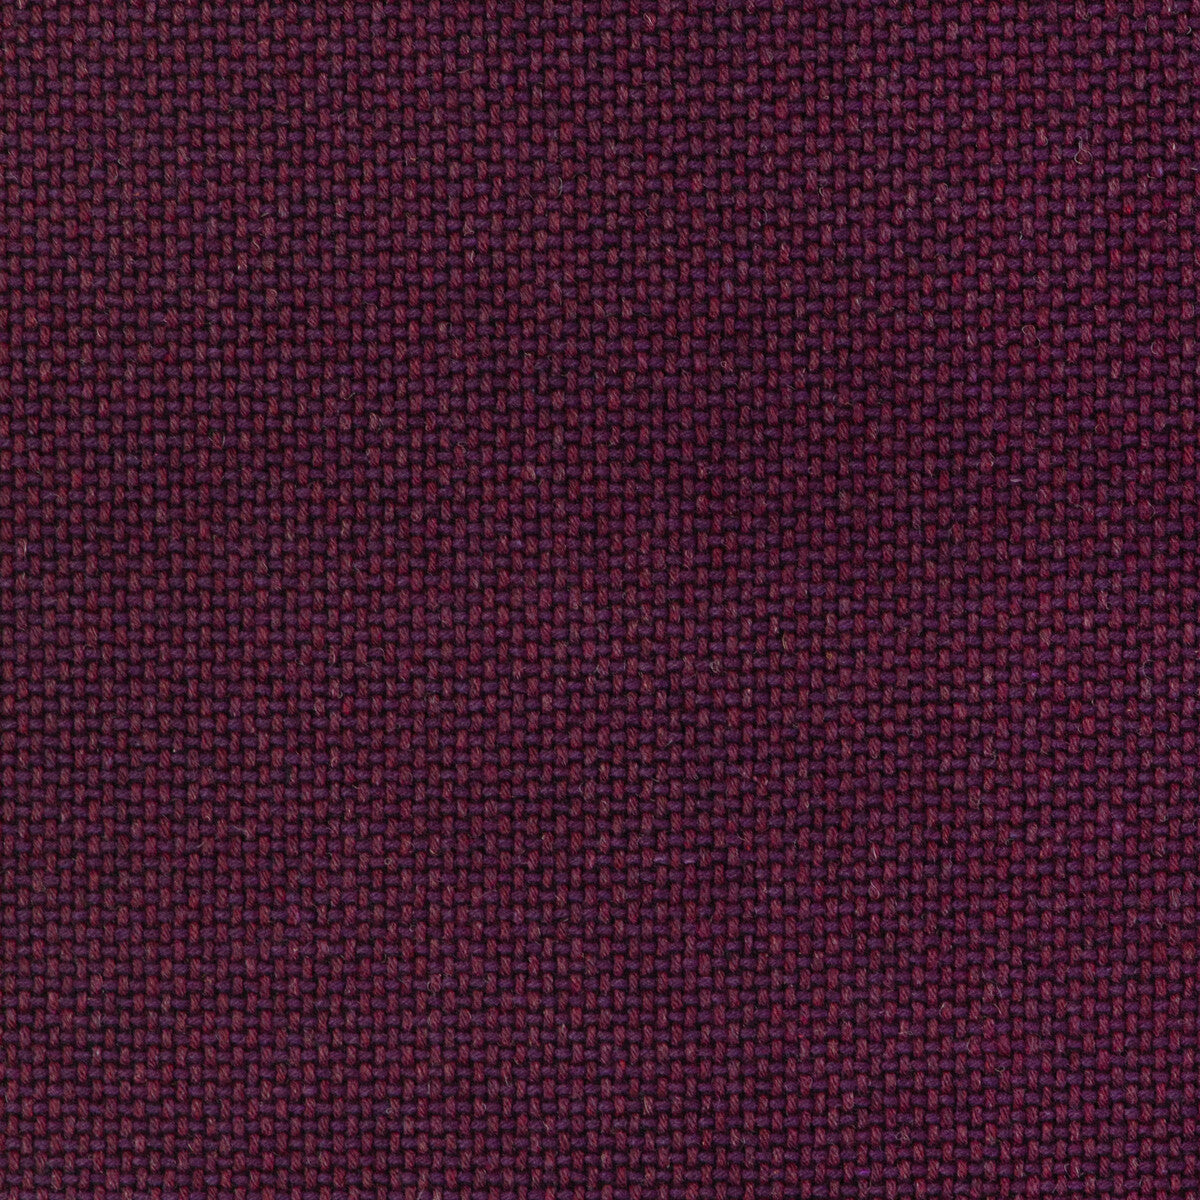 Easton Wool fabric in blackberry color - pattern 37027.910.0 - by Kravet Contract